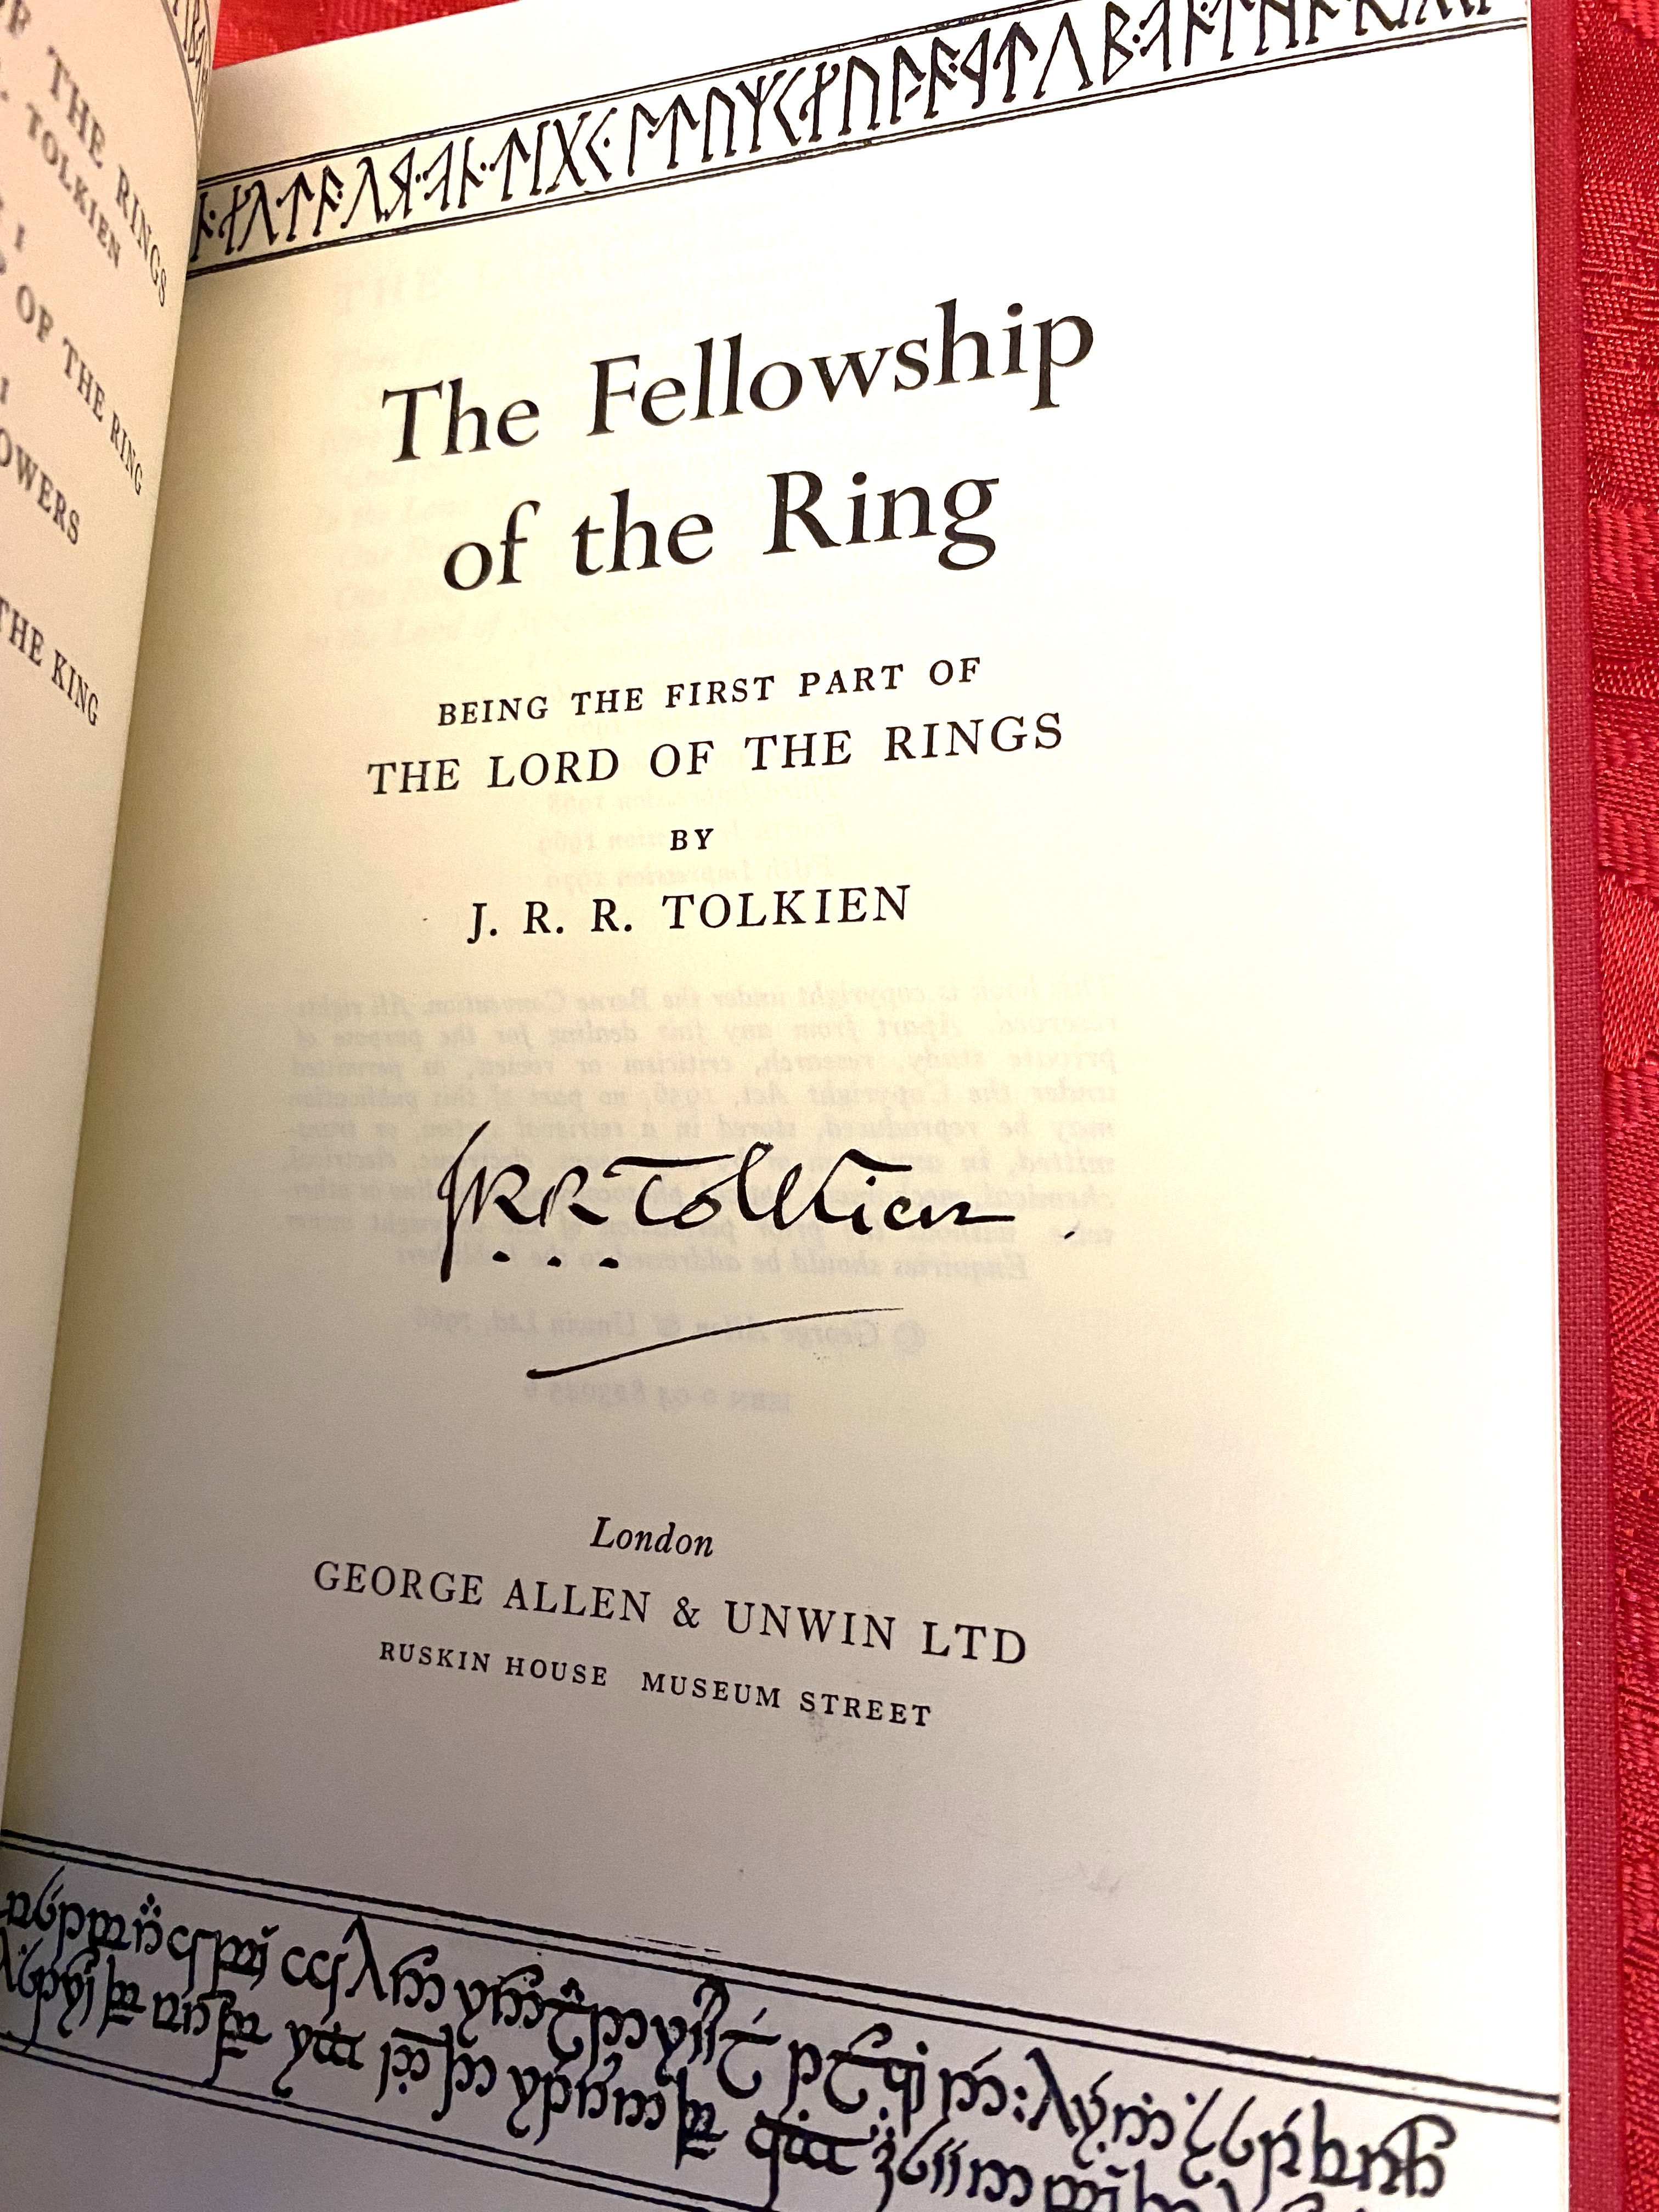 Rare Signed Lord of the Rings 3-Volume Set by J.R.R. Tolkien 4